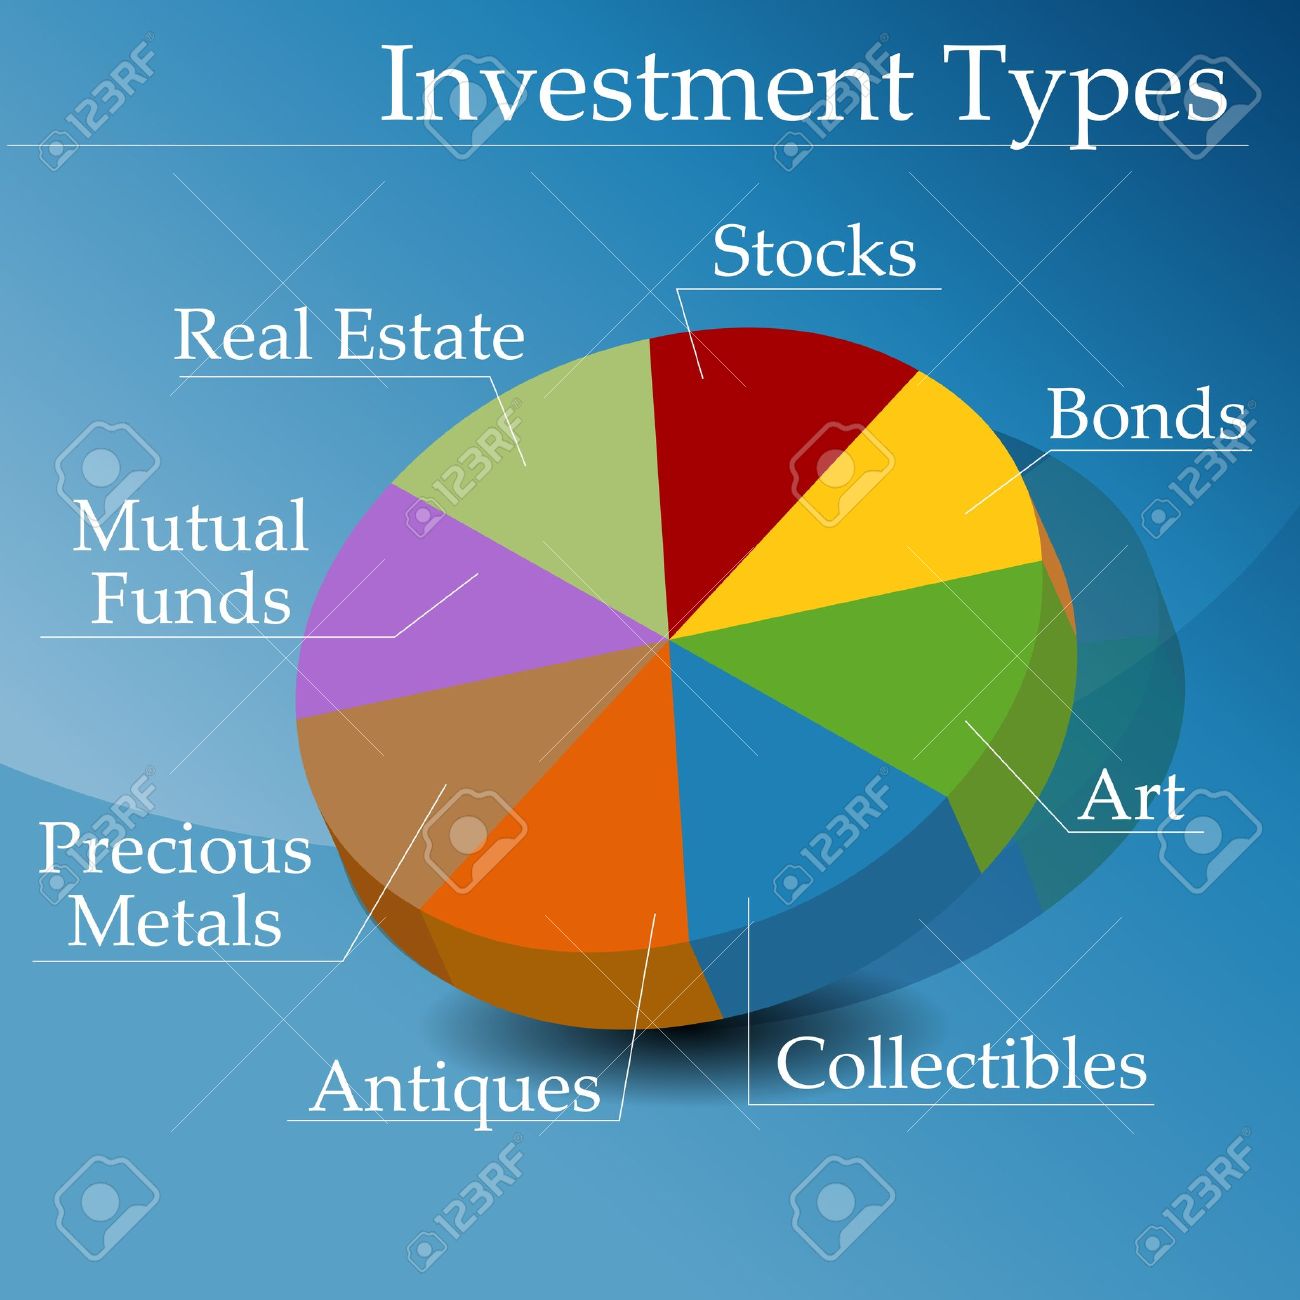 An Image Of A Pie Chart Showing Types Of Financial Investments.